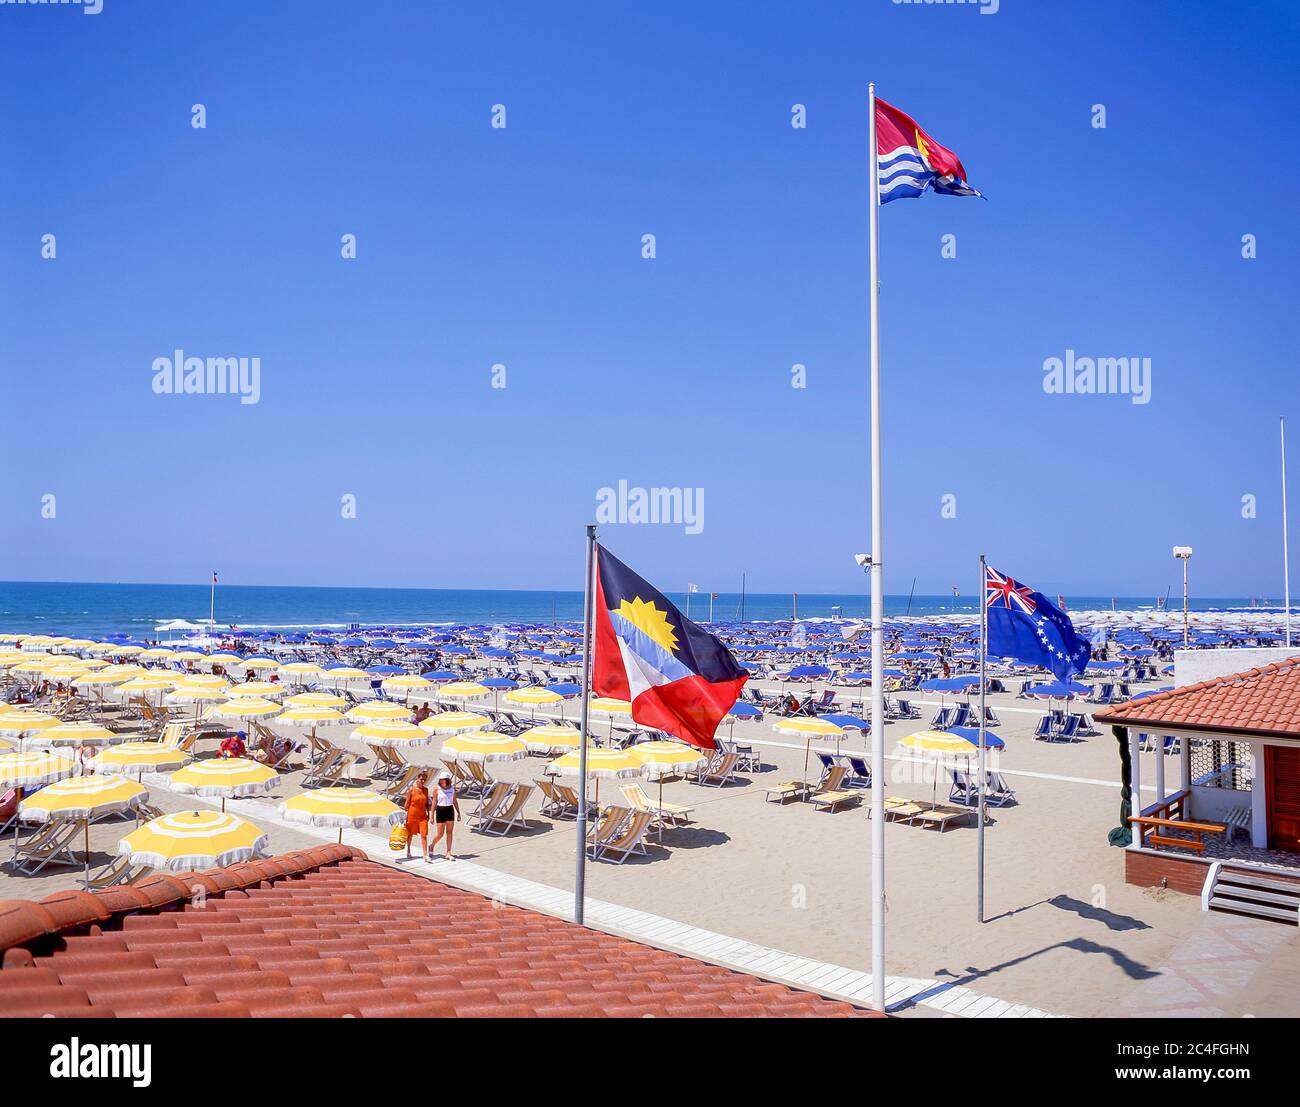 Beach view, Lido di Camaiore, Province of Lucca, Tuscany Region, Italy Stock Photo